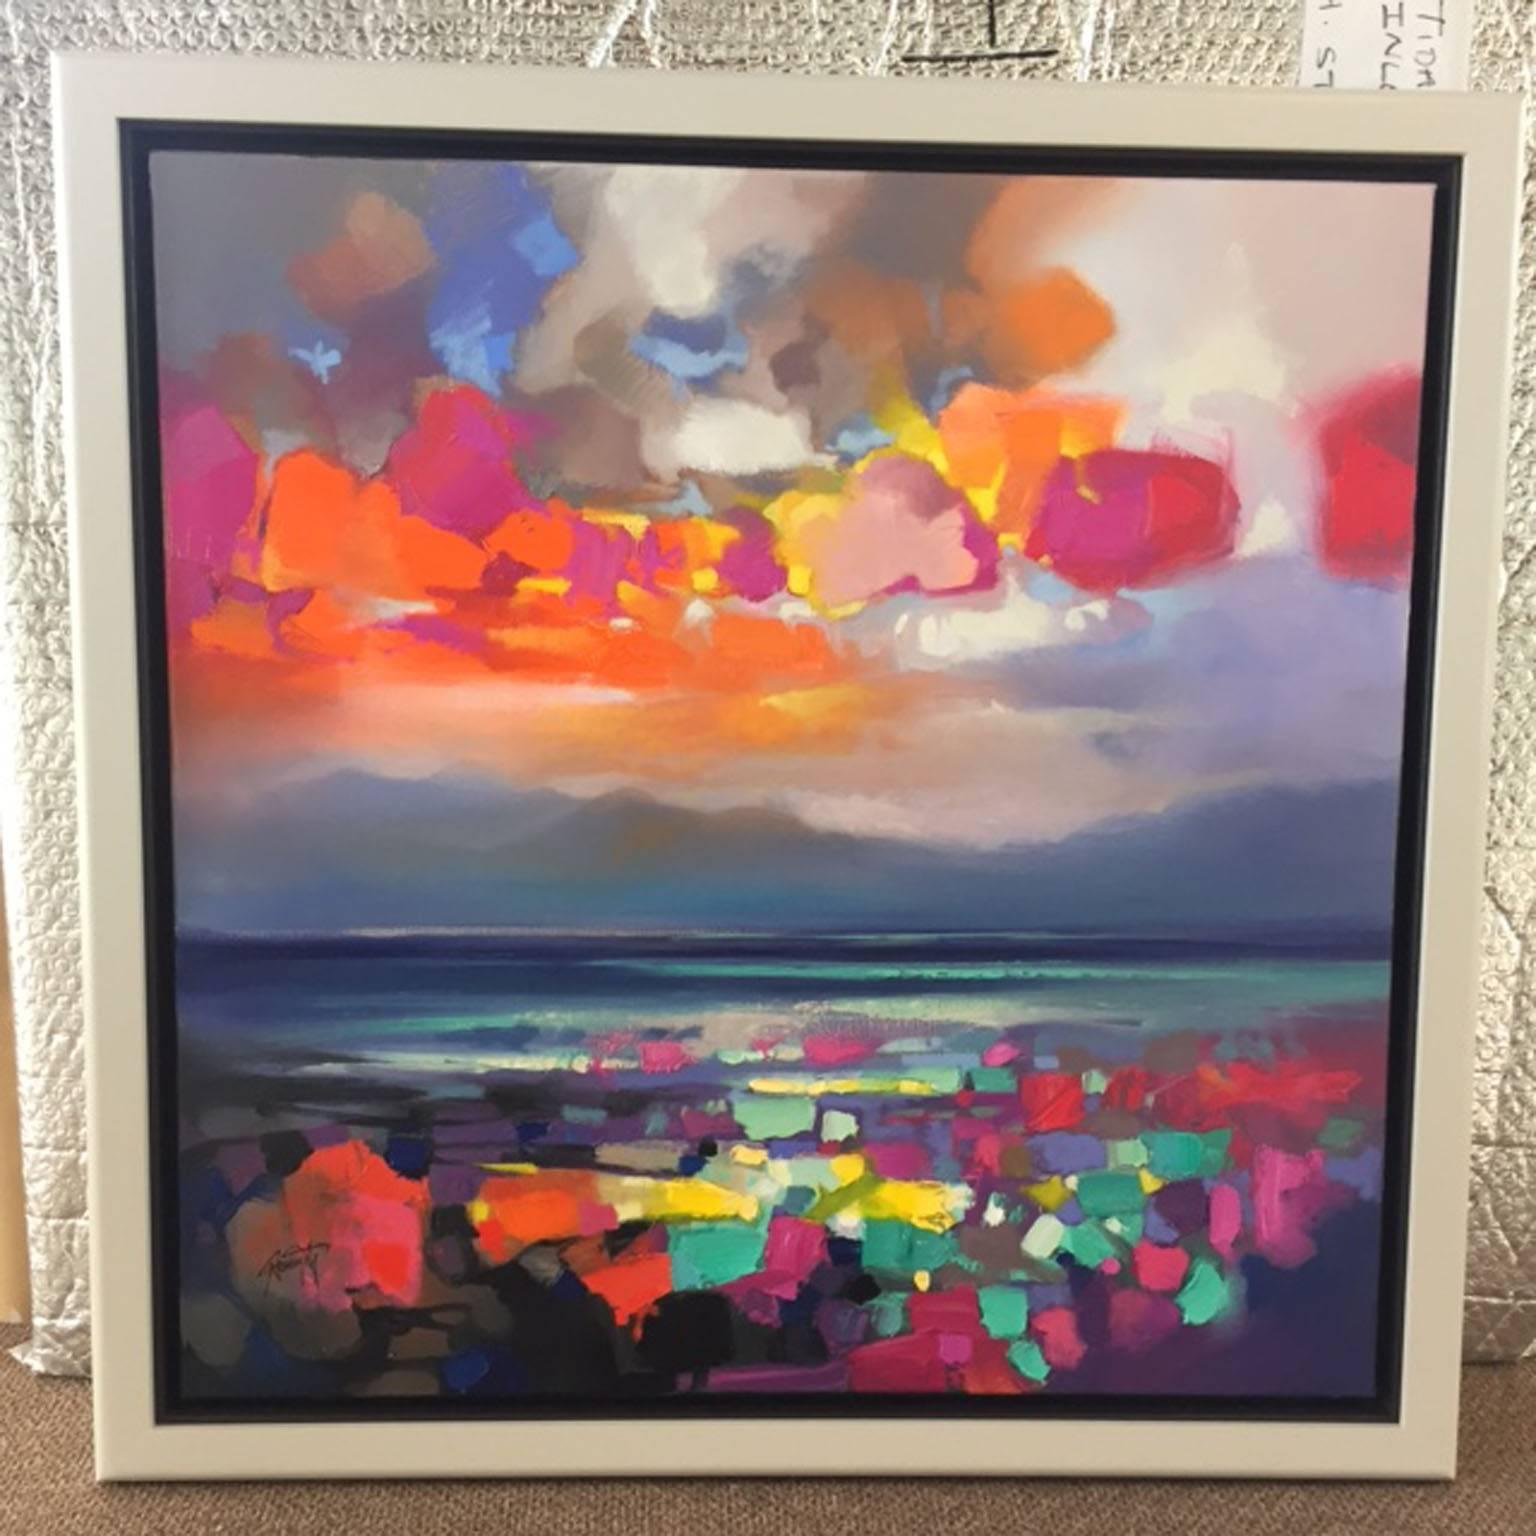 Armadale Orange, Colourful landscape in a contemporary abstract style - Painting by Scott Naismith